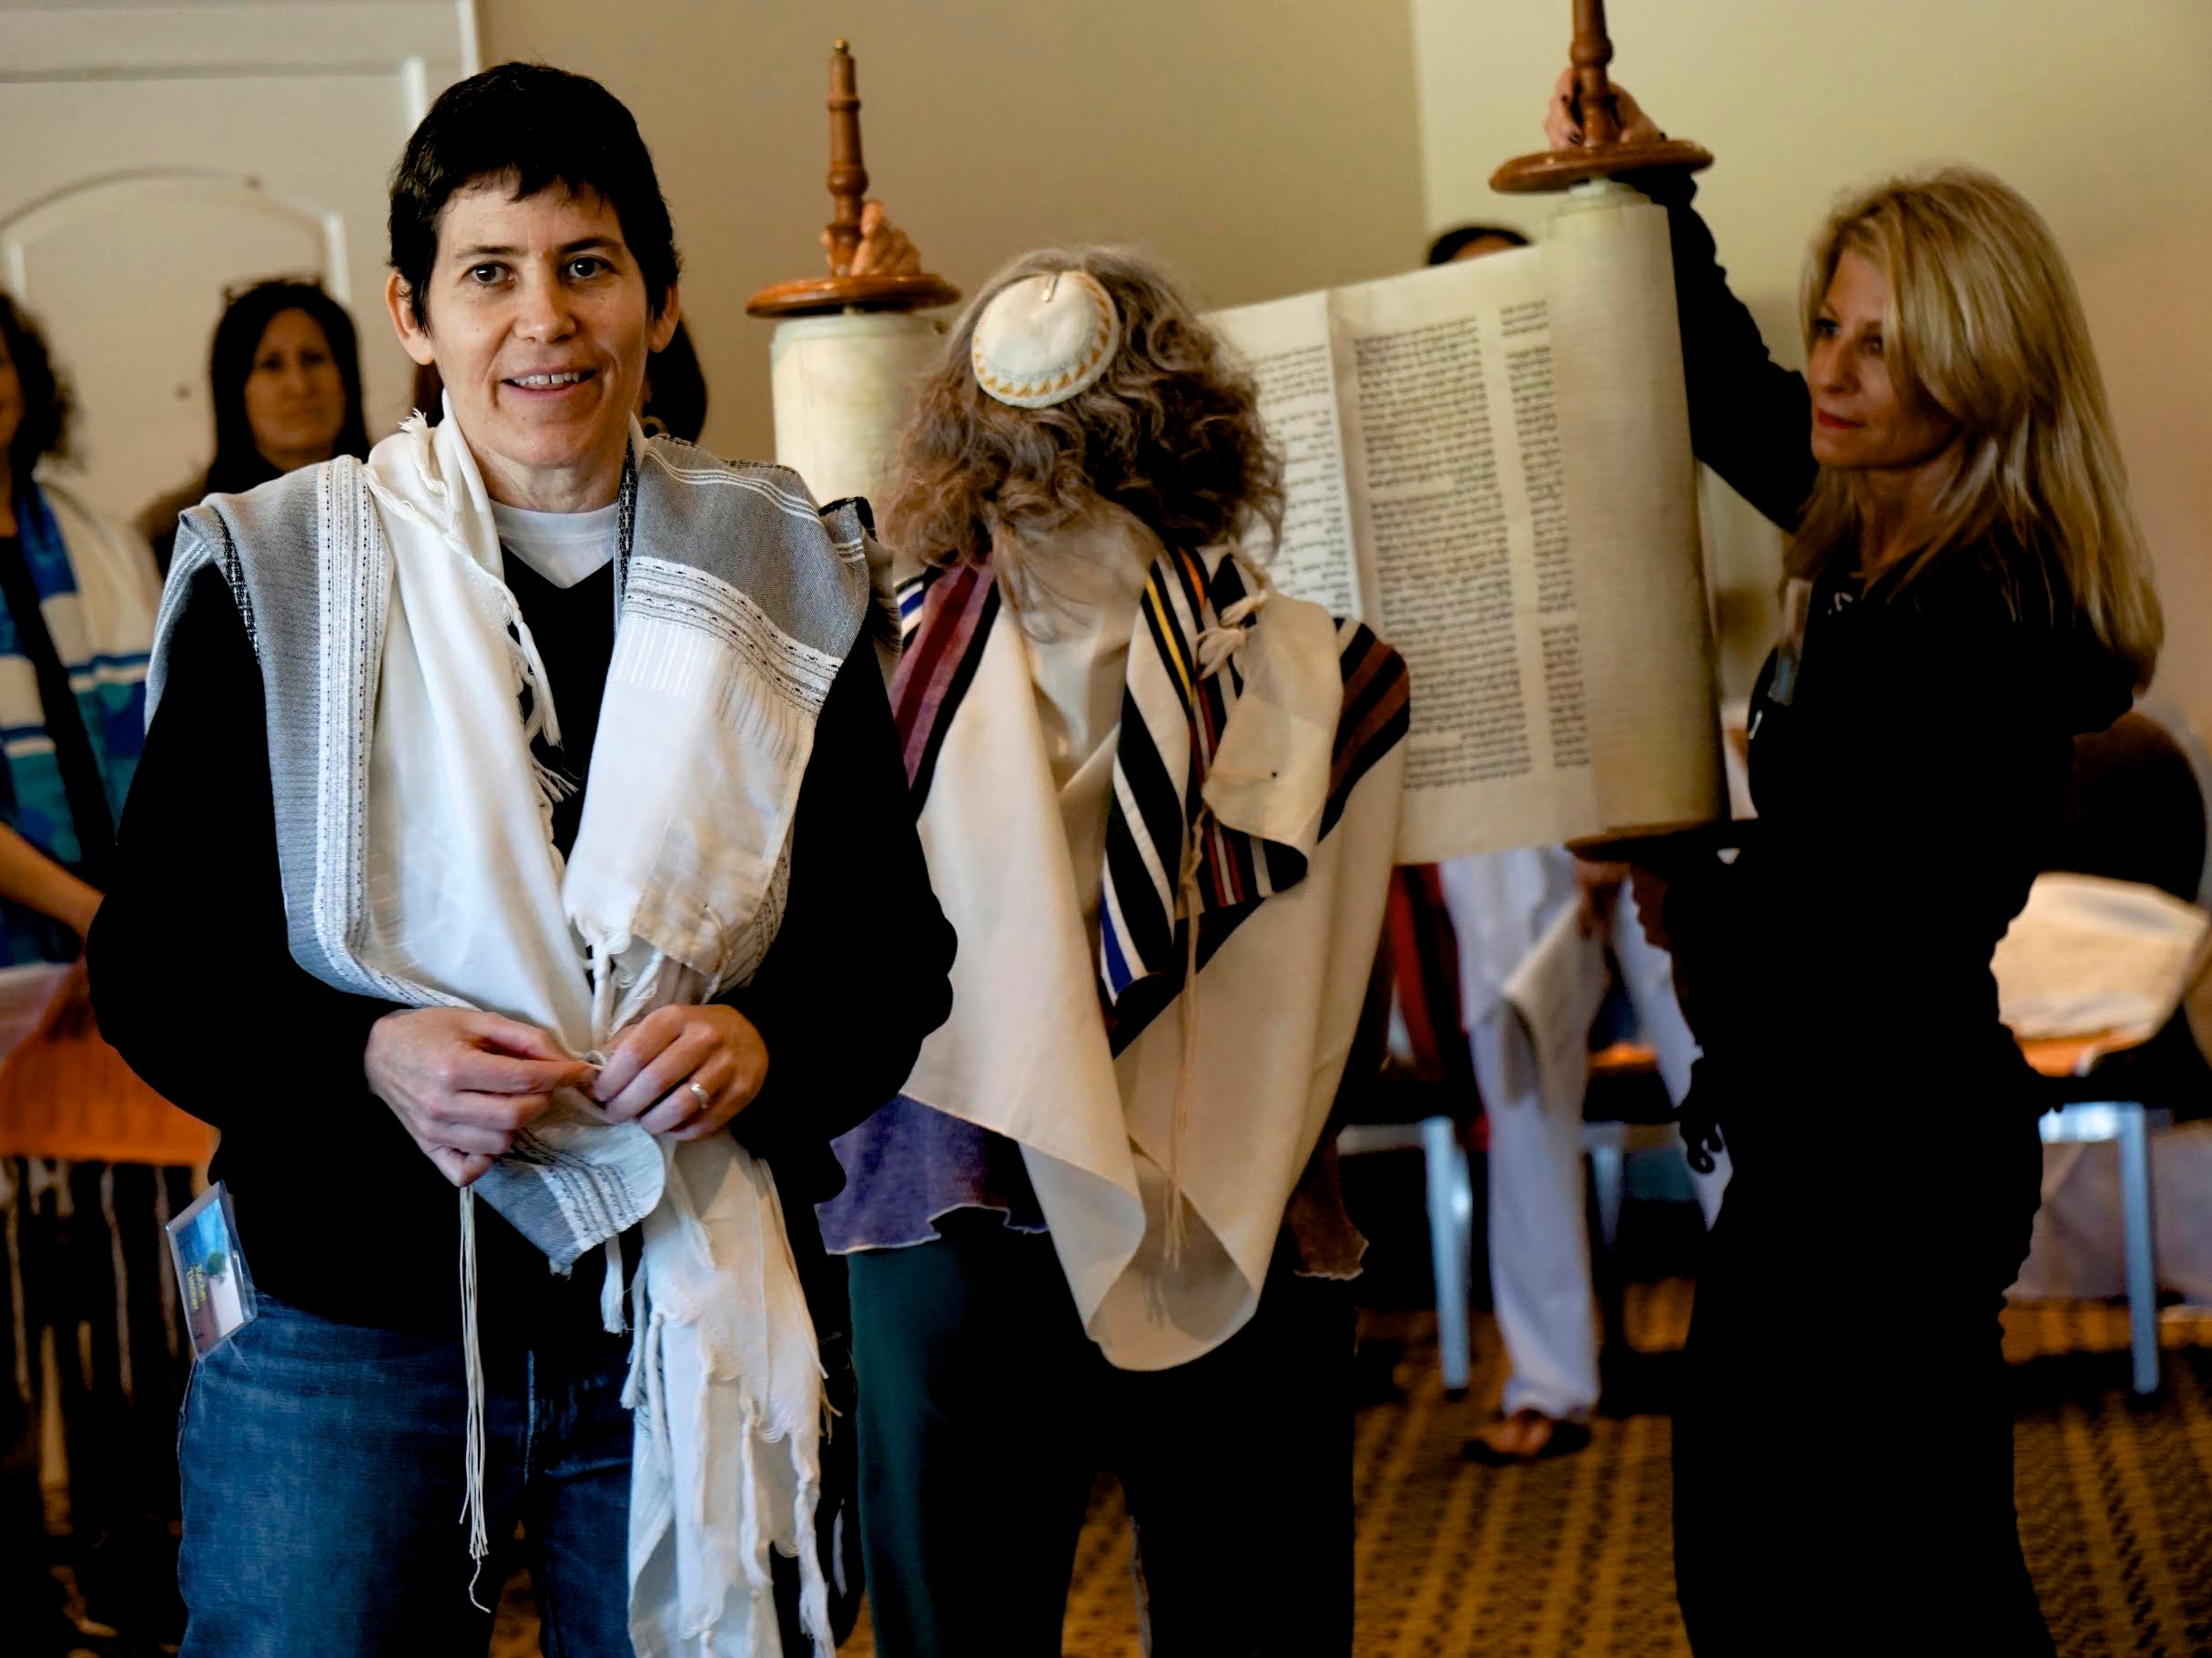 Rabbi Rachel Timoner, associate rabbi of the Leo Baeck Temple in Los Angeles, is being tapped to take over the pulpit at Congregation Beth Elohim in Brooklyn, N.Y. (Leo Baeck Temple)